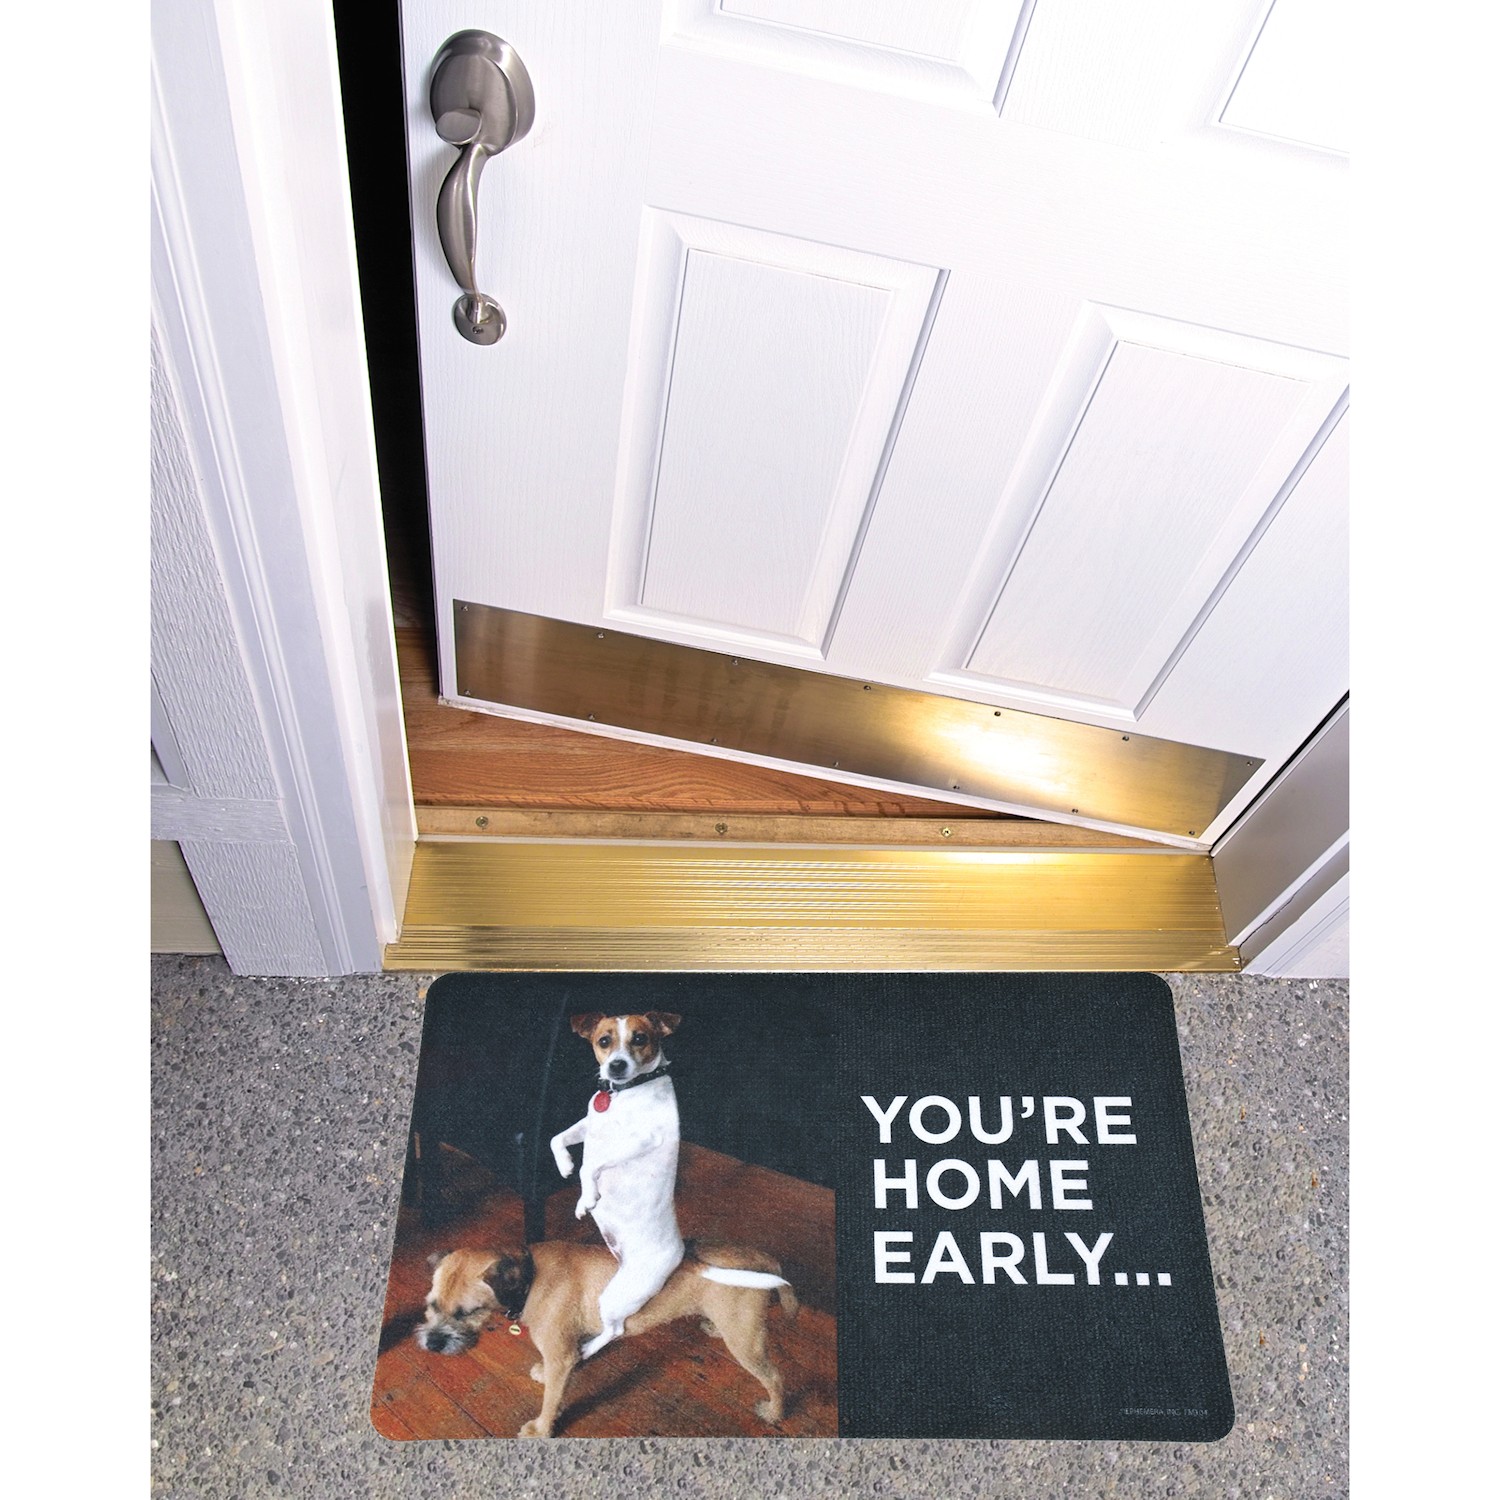 GRUMPY OLD COWBOY BEAUTIFUL COWGIRL DOORMAT WELCOME ENTRY MAT FUNNY HORSE DOG 